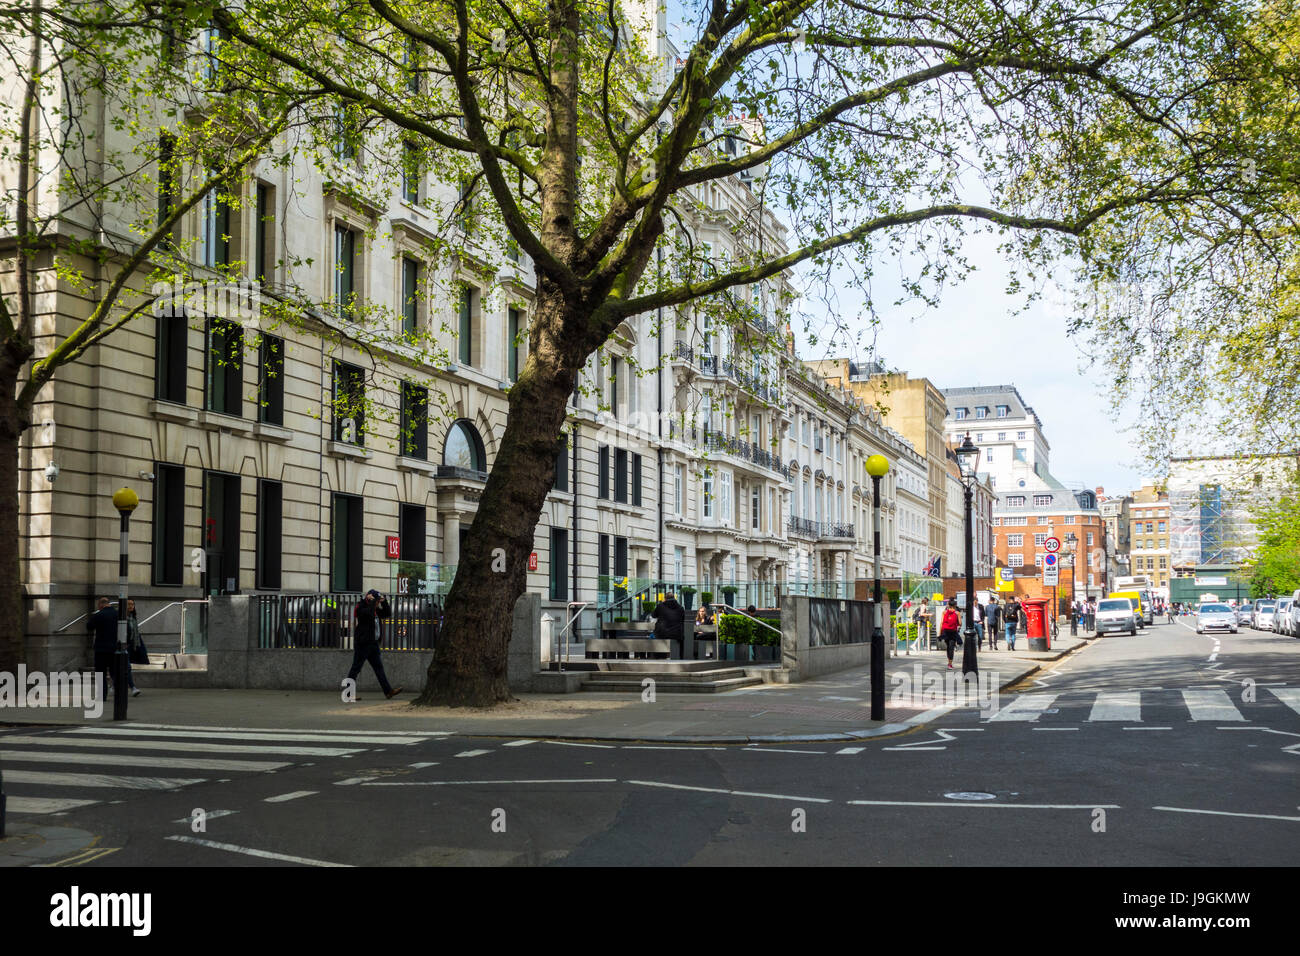 Pedestrian crossings on Lincoln’s Inn Fields looking towards the LSE Department of Law, City of London, UK Stock Photo